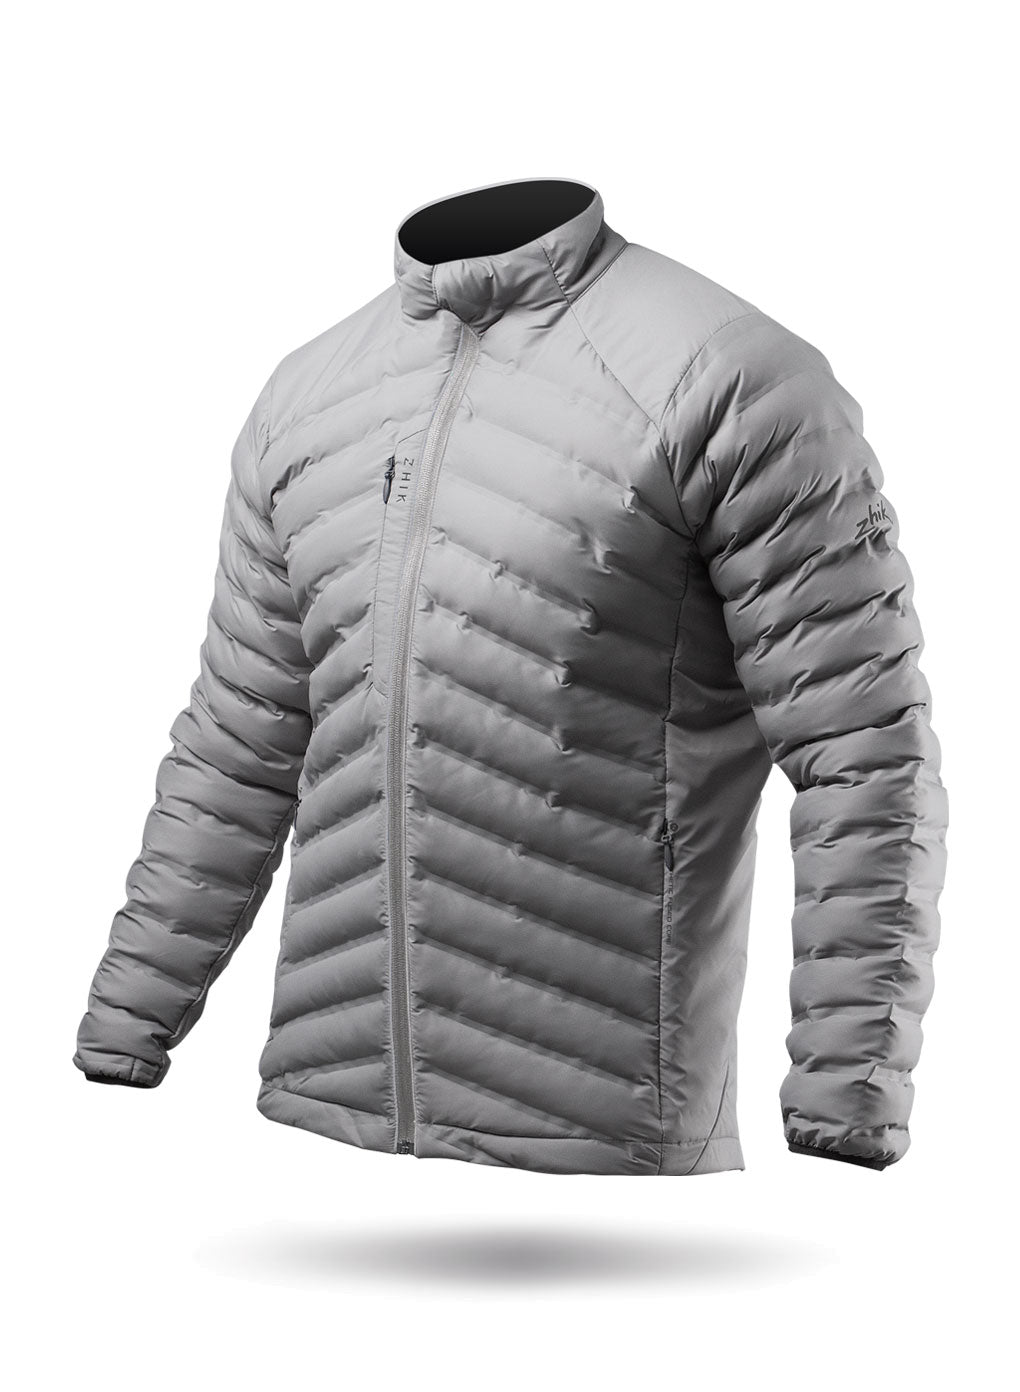 Mens Platinum Cell Insulated Jacket